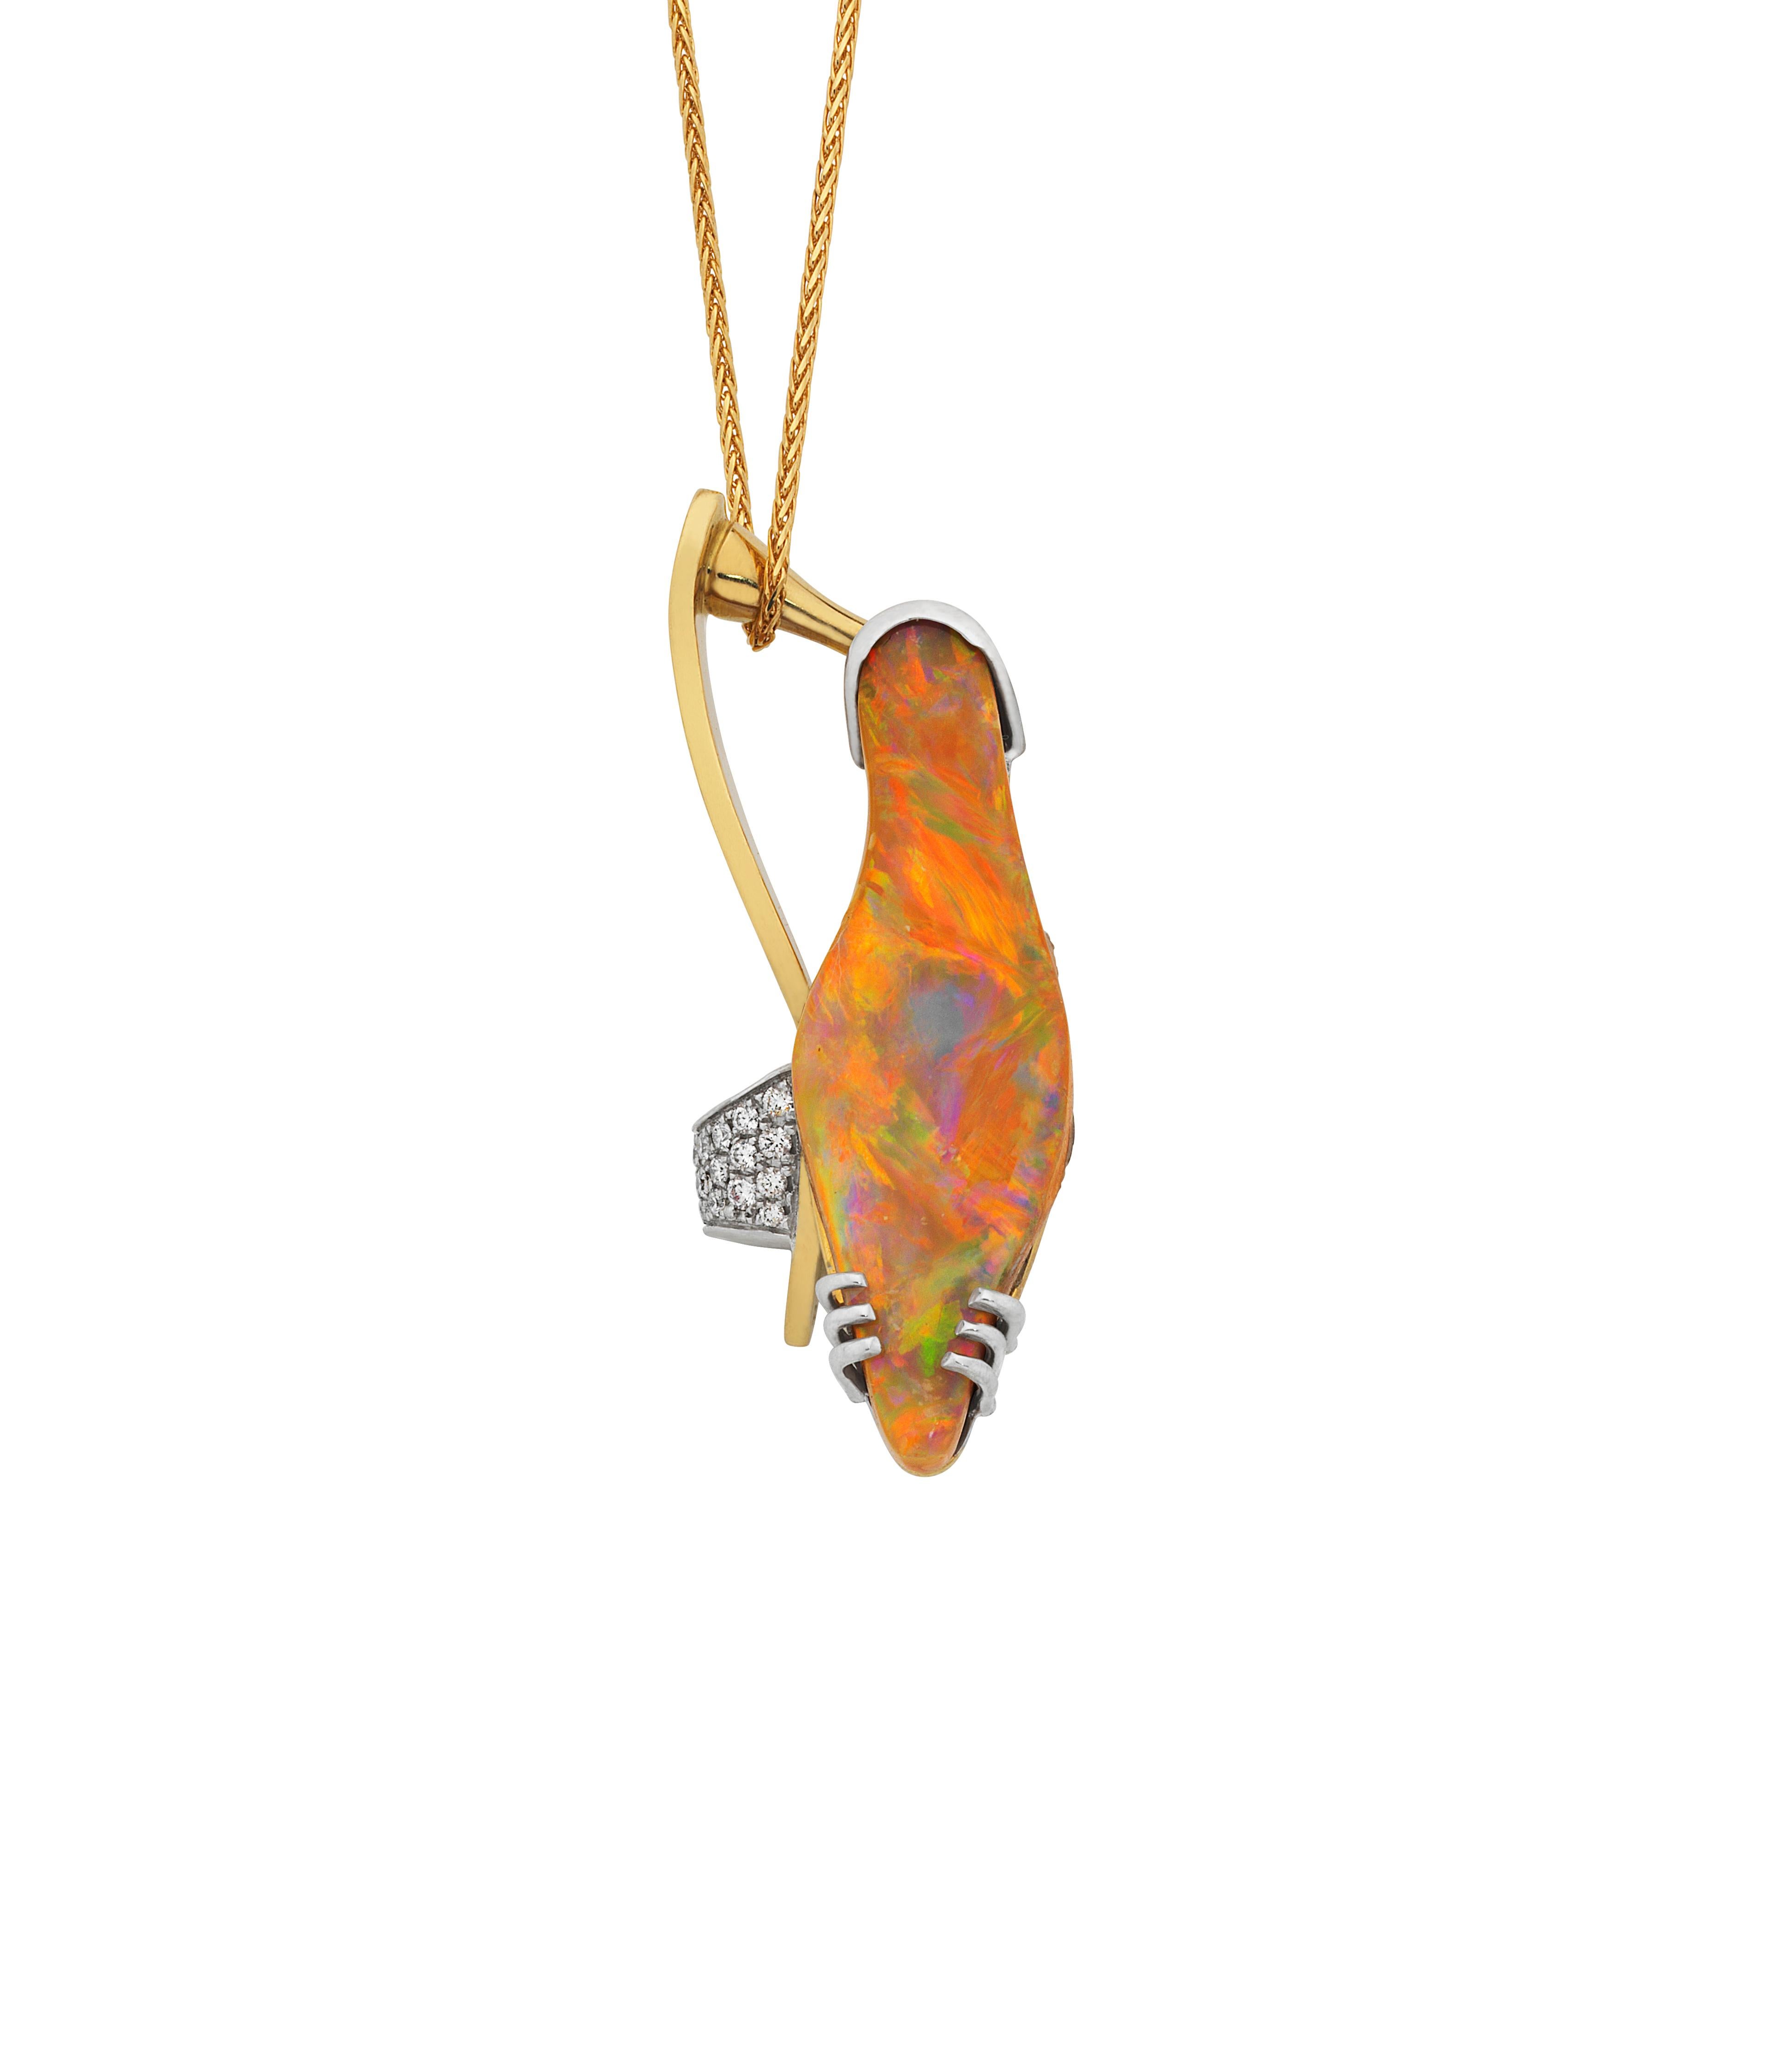 Giulians handmade 18 karat yellow and white gold 11.78ct Australian Boulder opal and Diamond pendant.  The pendant showcases a natural solid Australian Boulder opal, from Queensland, with a light colour and bright pastel fire.  The shape of the opal